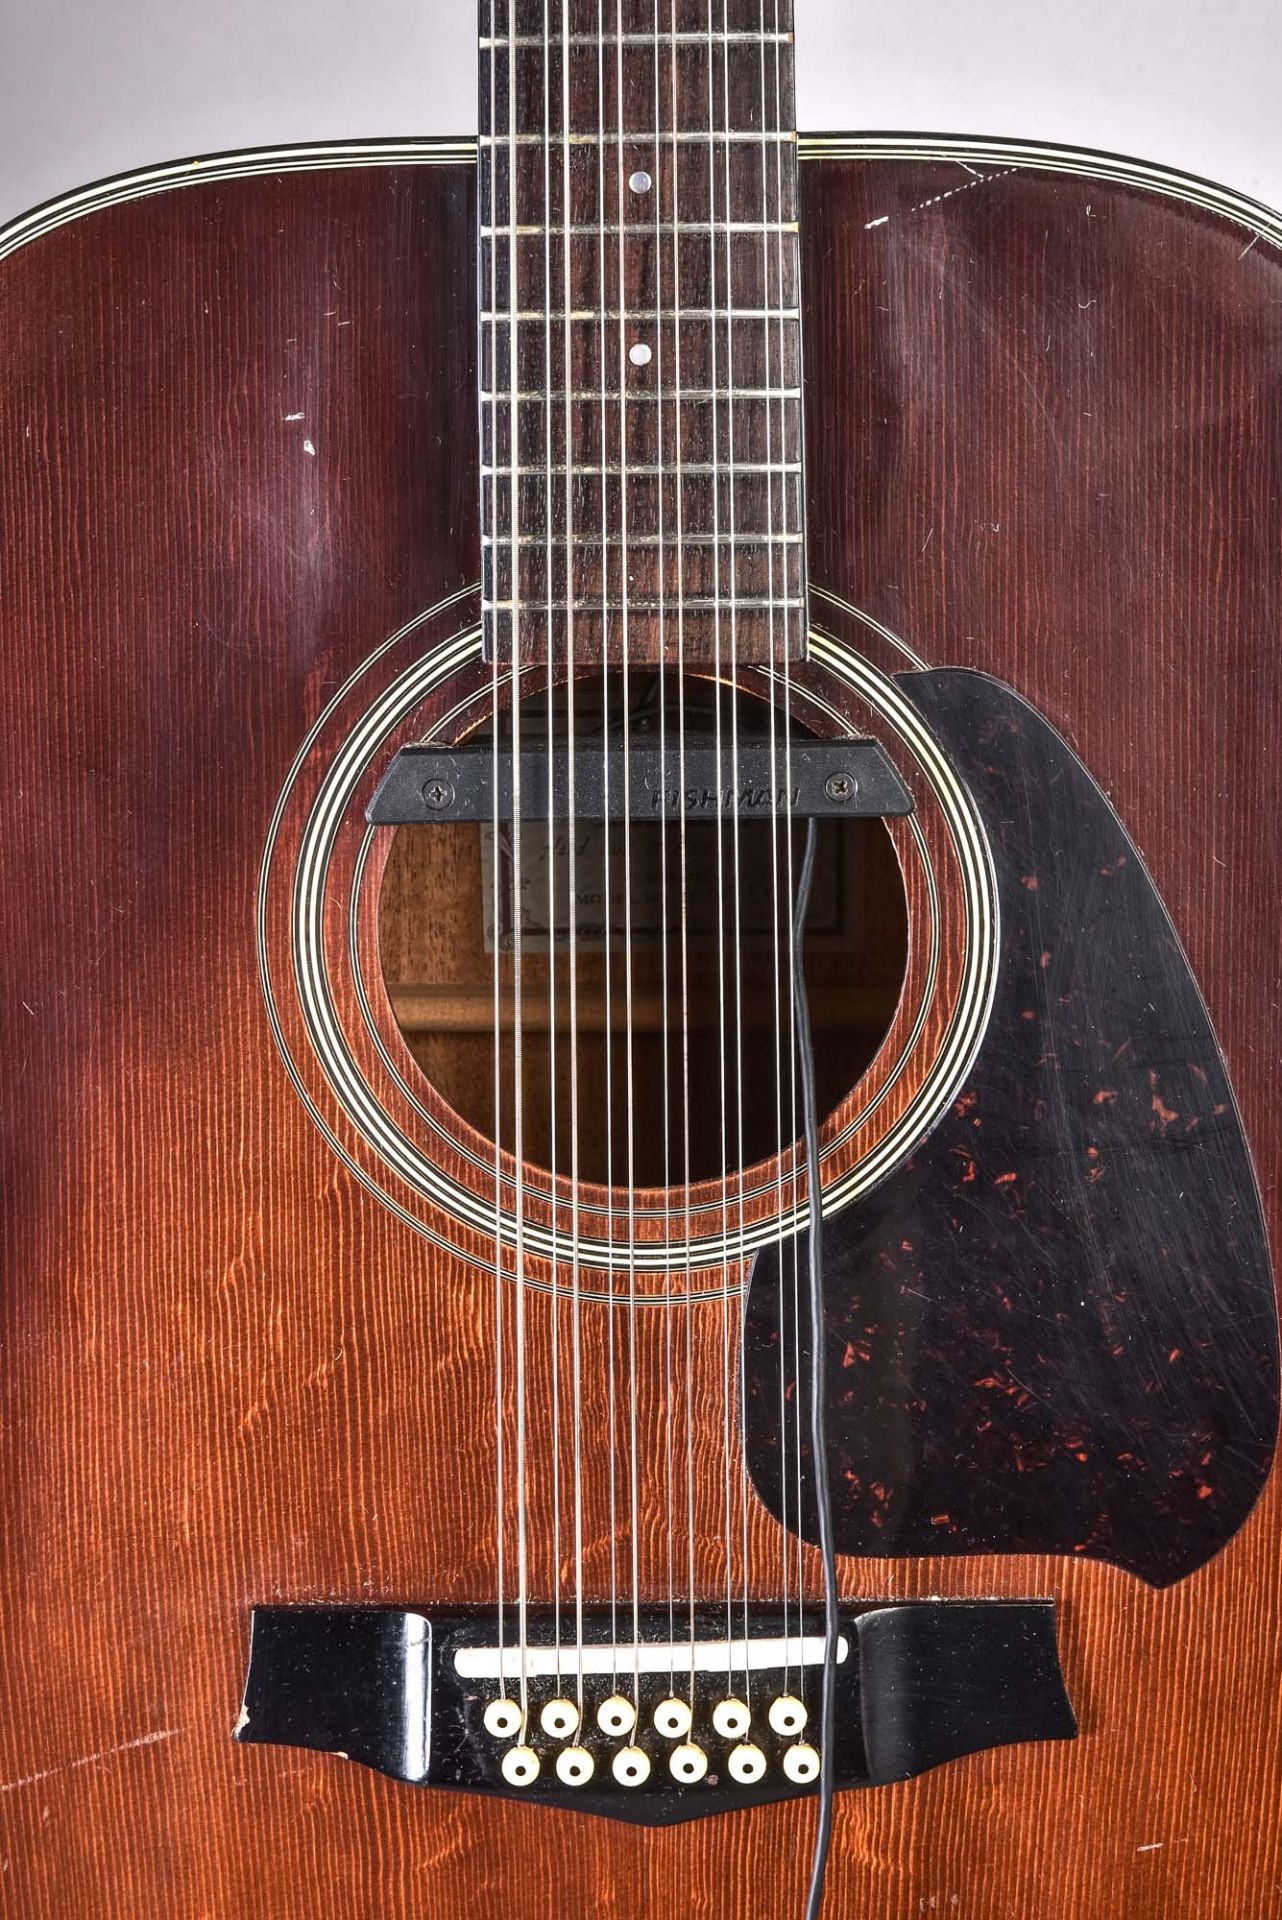 Vintage 12-string acoustic western guitar Ibanez, model V302 TV, dreadnought, with a later built-in - Image 4 of 9